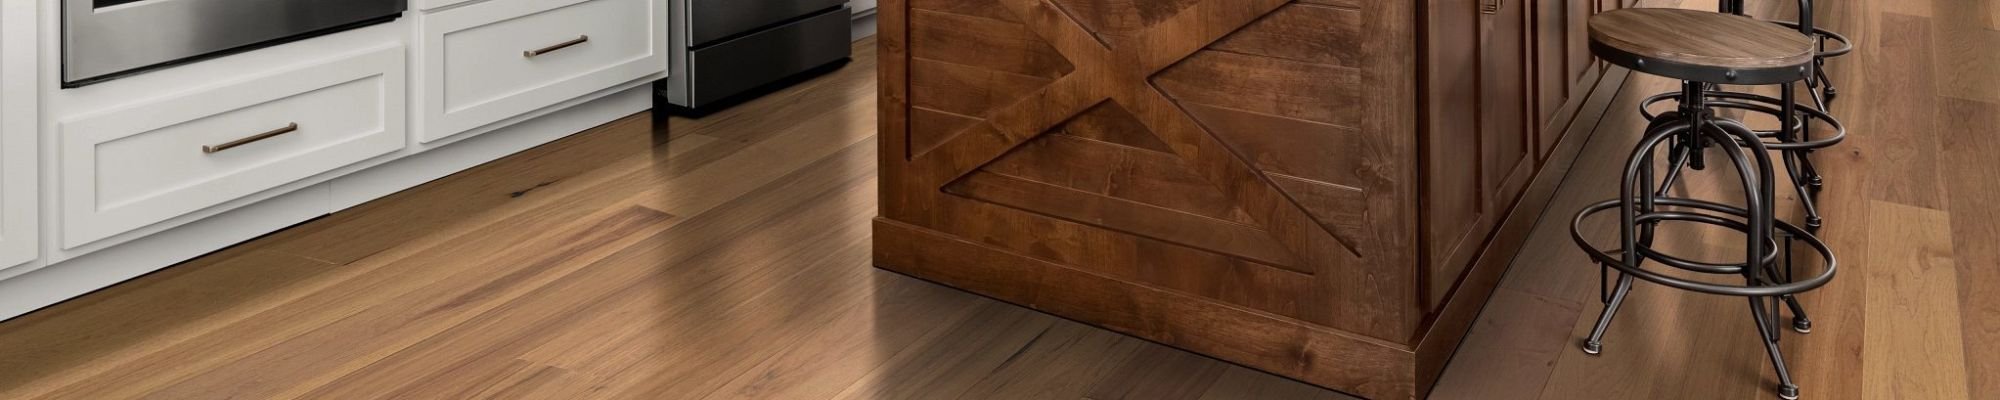 kitchen hardwood floor from Potomac Tile and Carpet in Frederick, MD